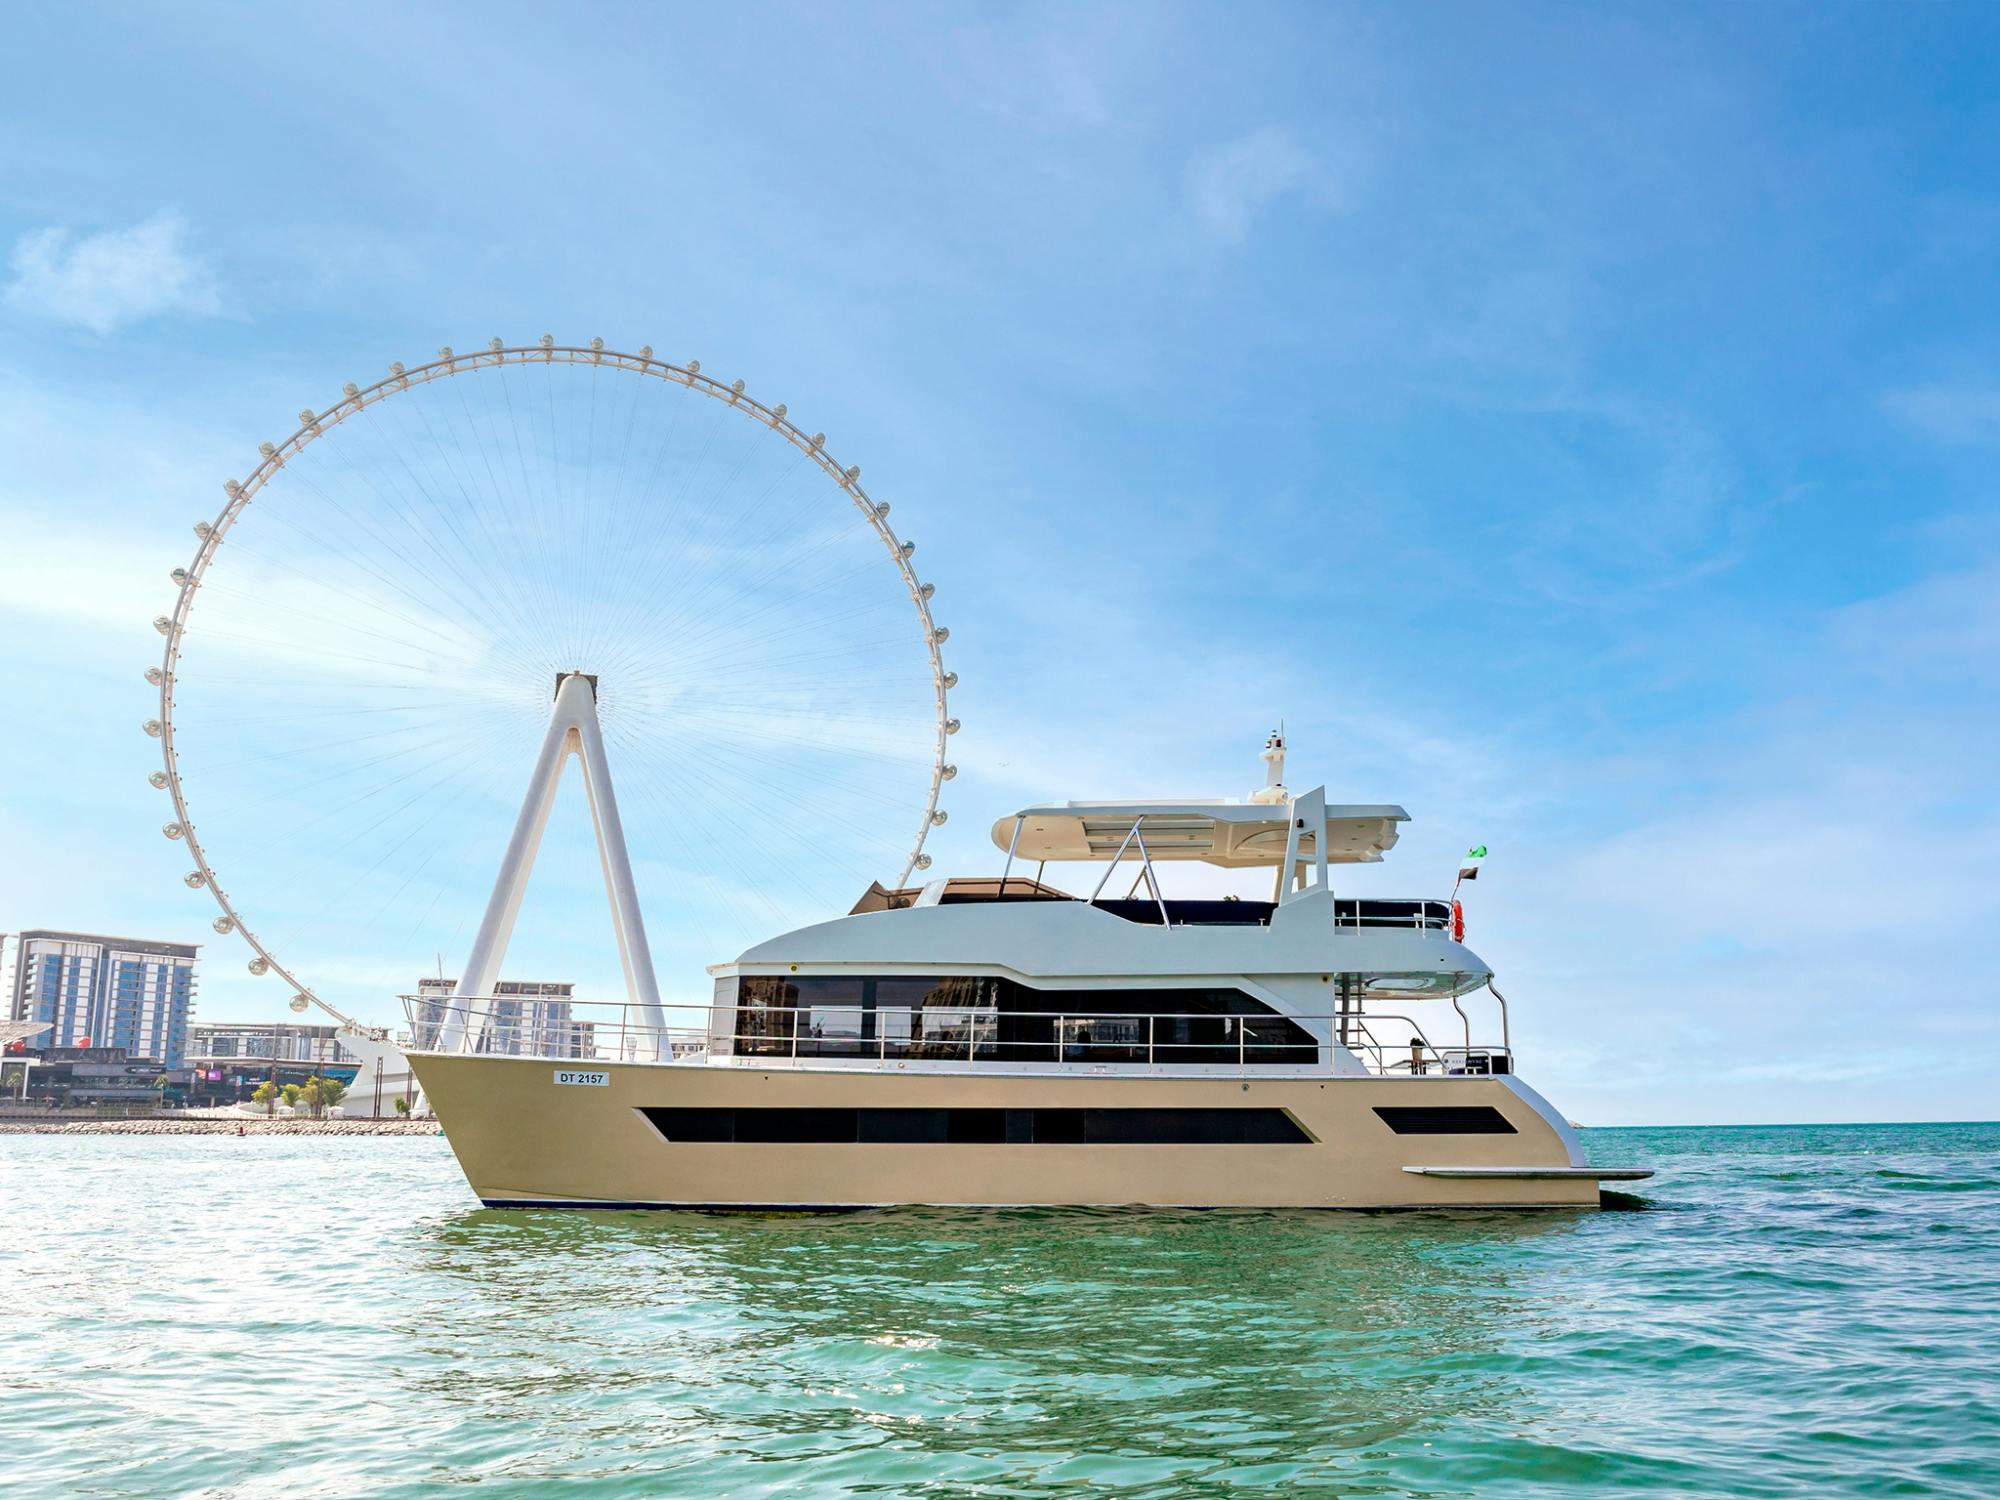 Dubai luxury yacht experience with ticket options Musement